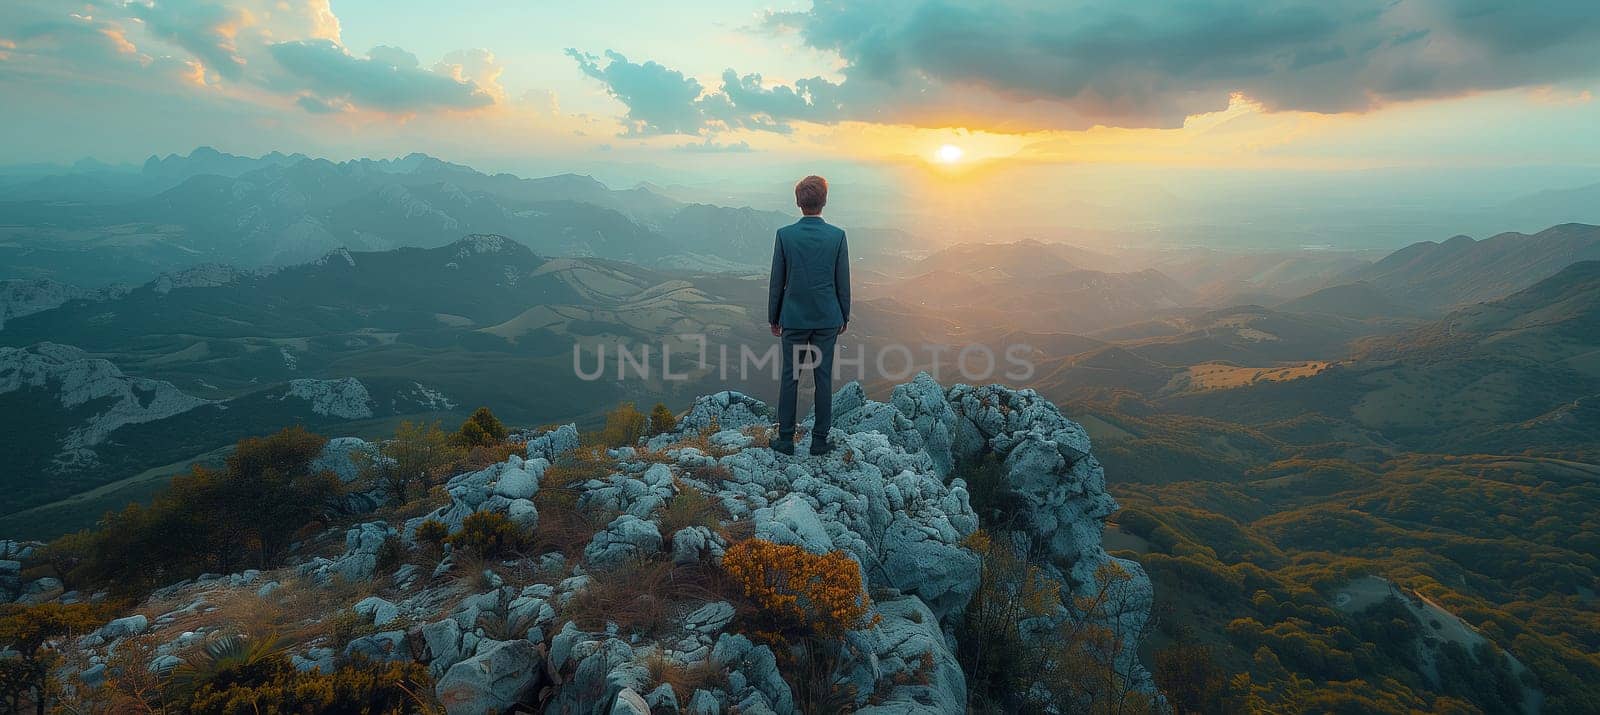 A man stands on a hilltop, gazing at the sunset over the natural landscape with colorful clouds in the sky, creating a picturesque atmosphere